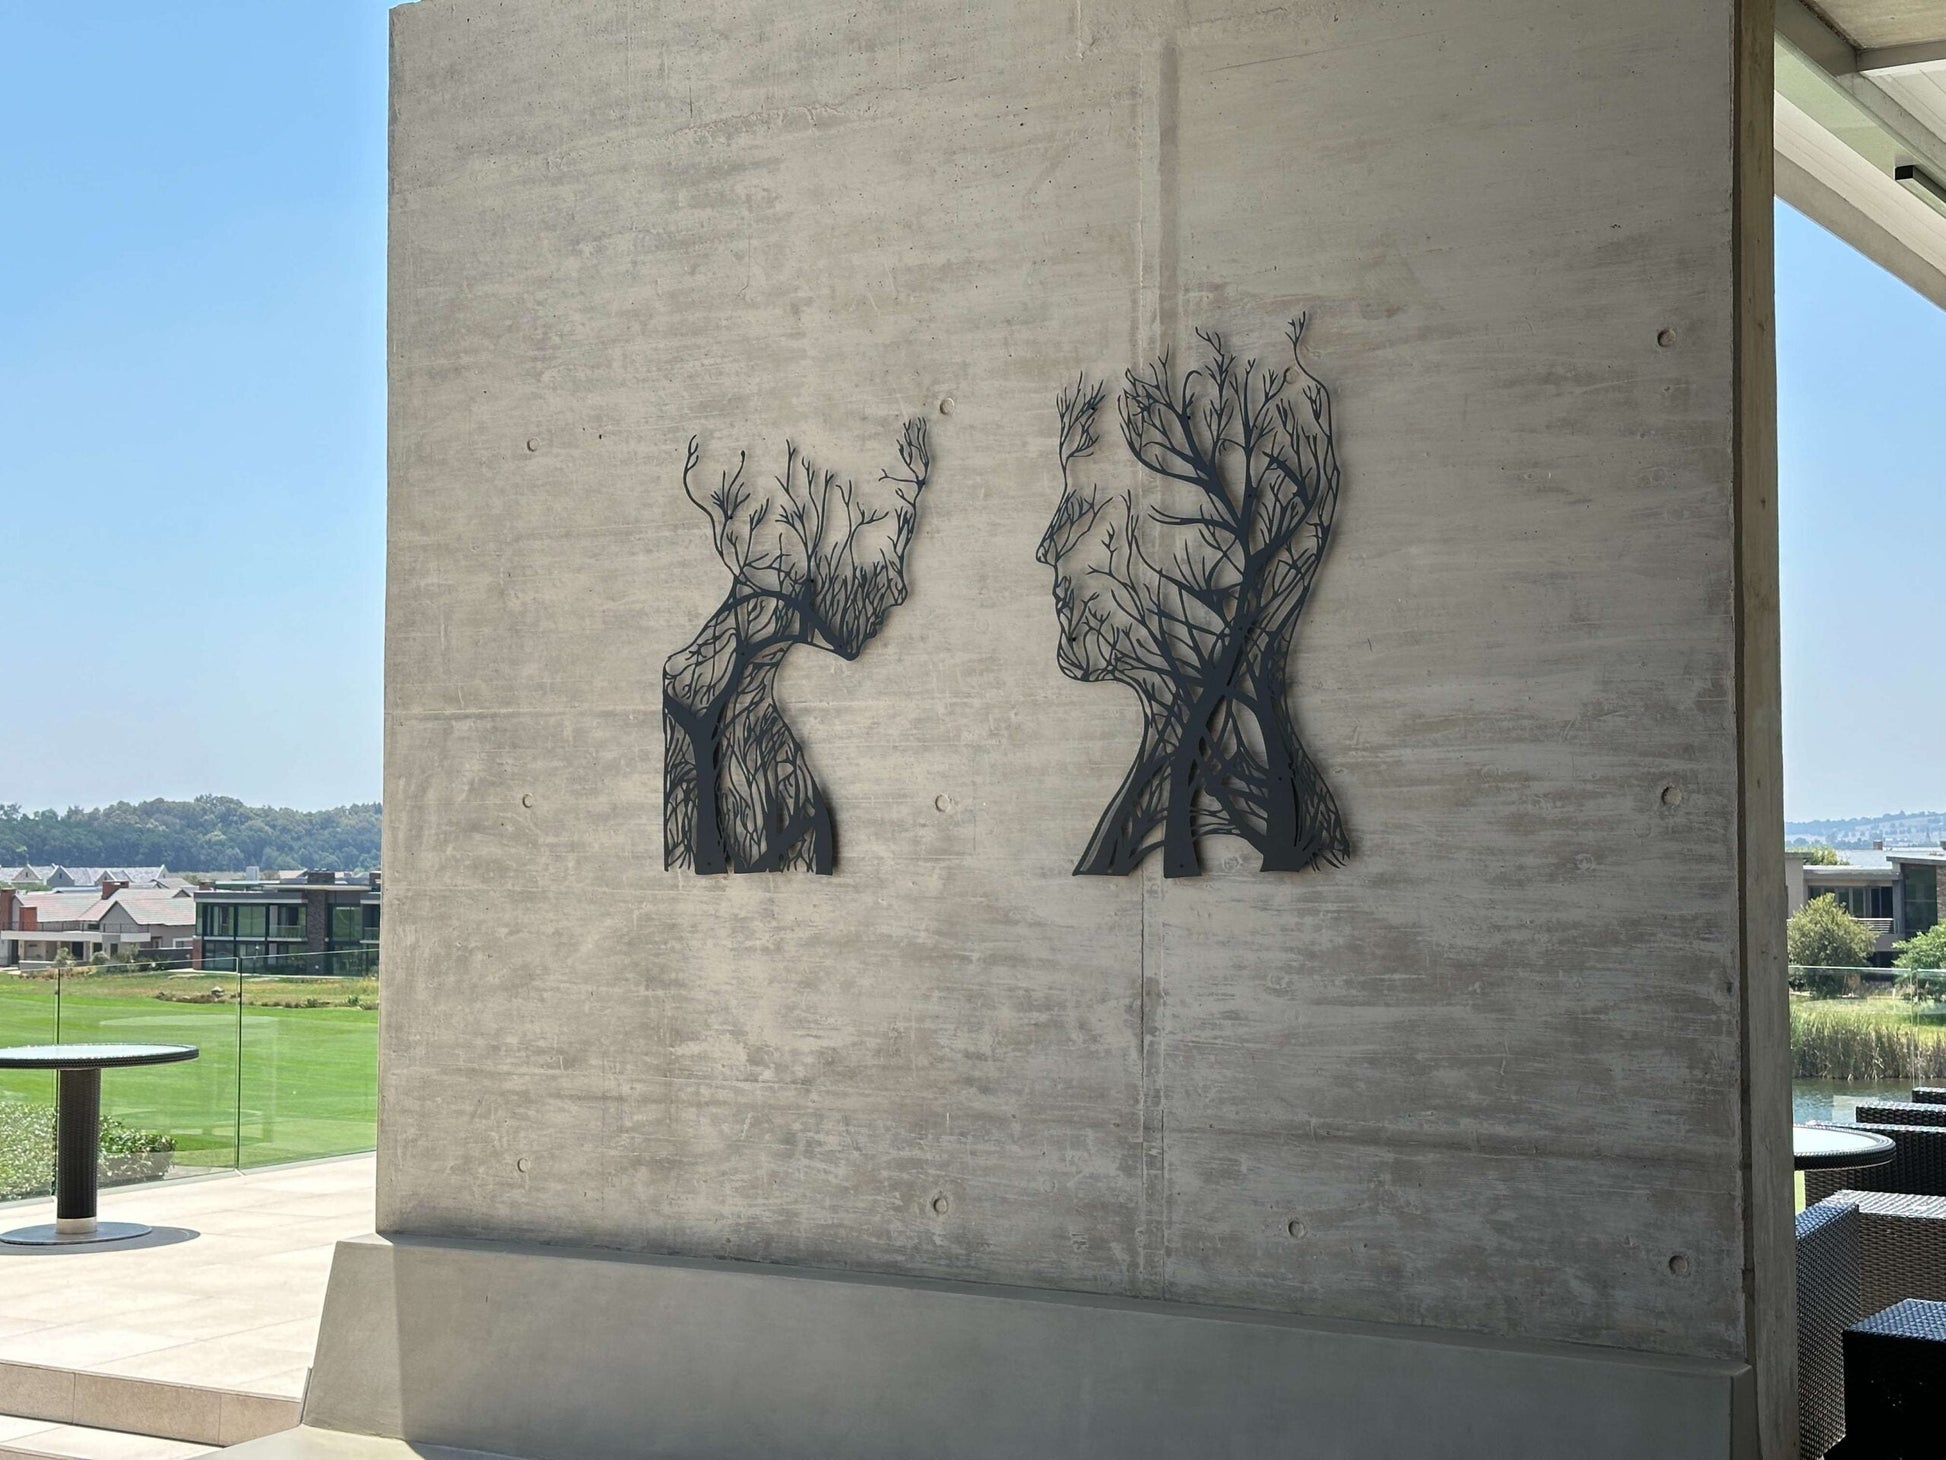 Human in Trees Rooted Metal Wall Art